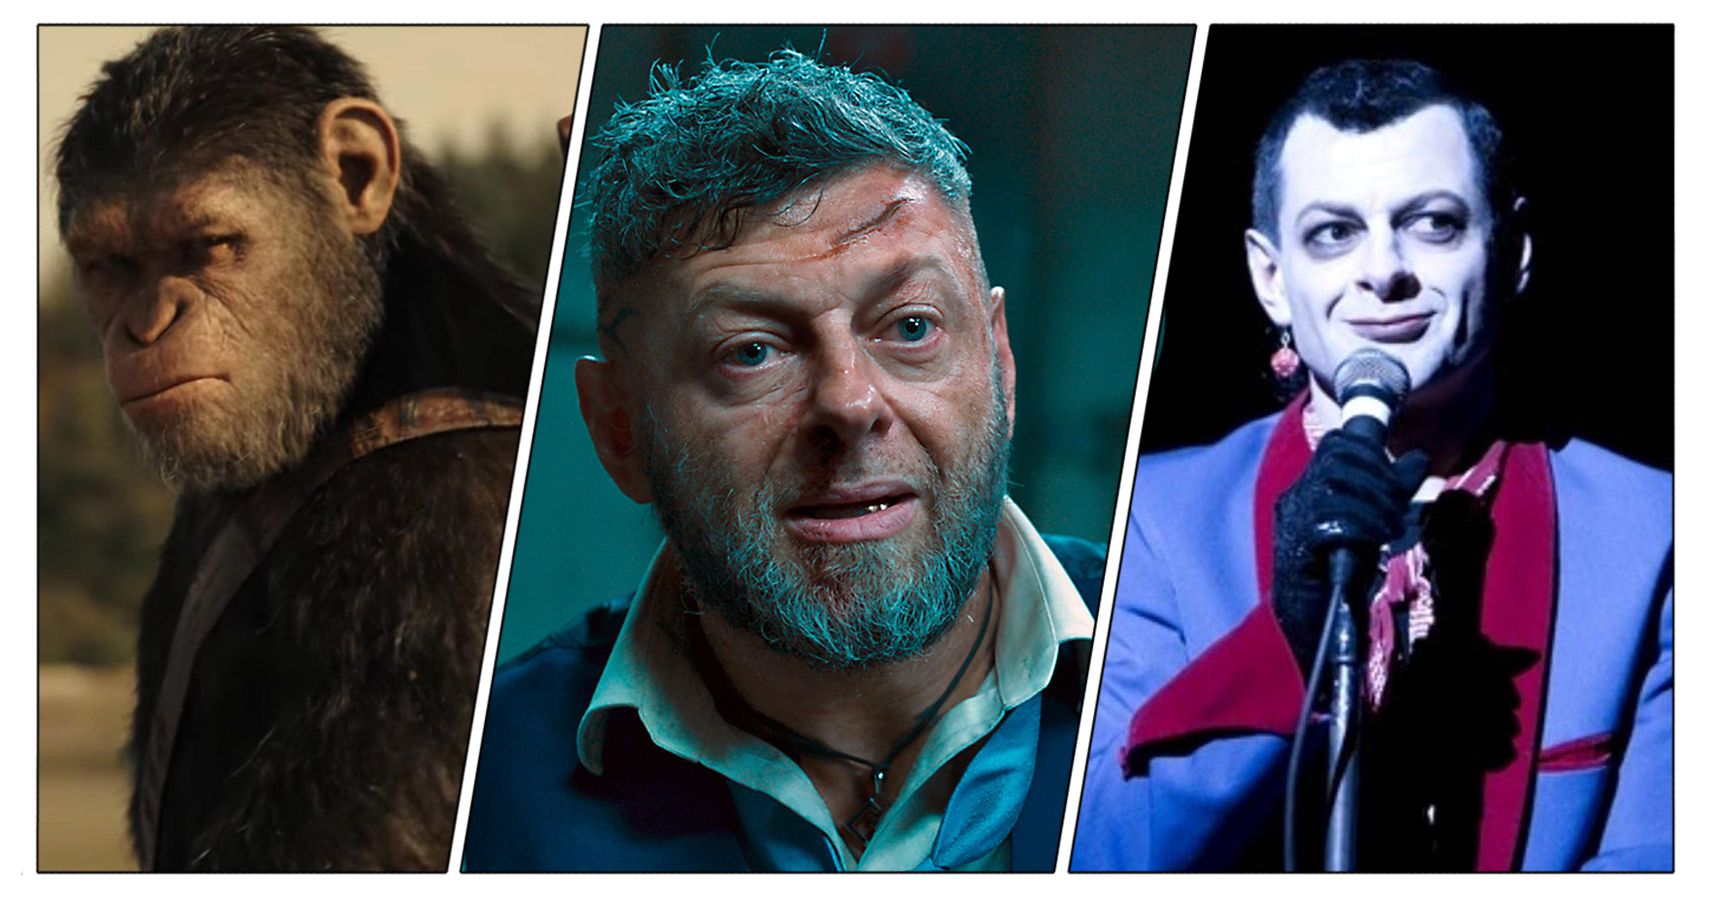 Andy Serkis 10 Best Roles Ranked